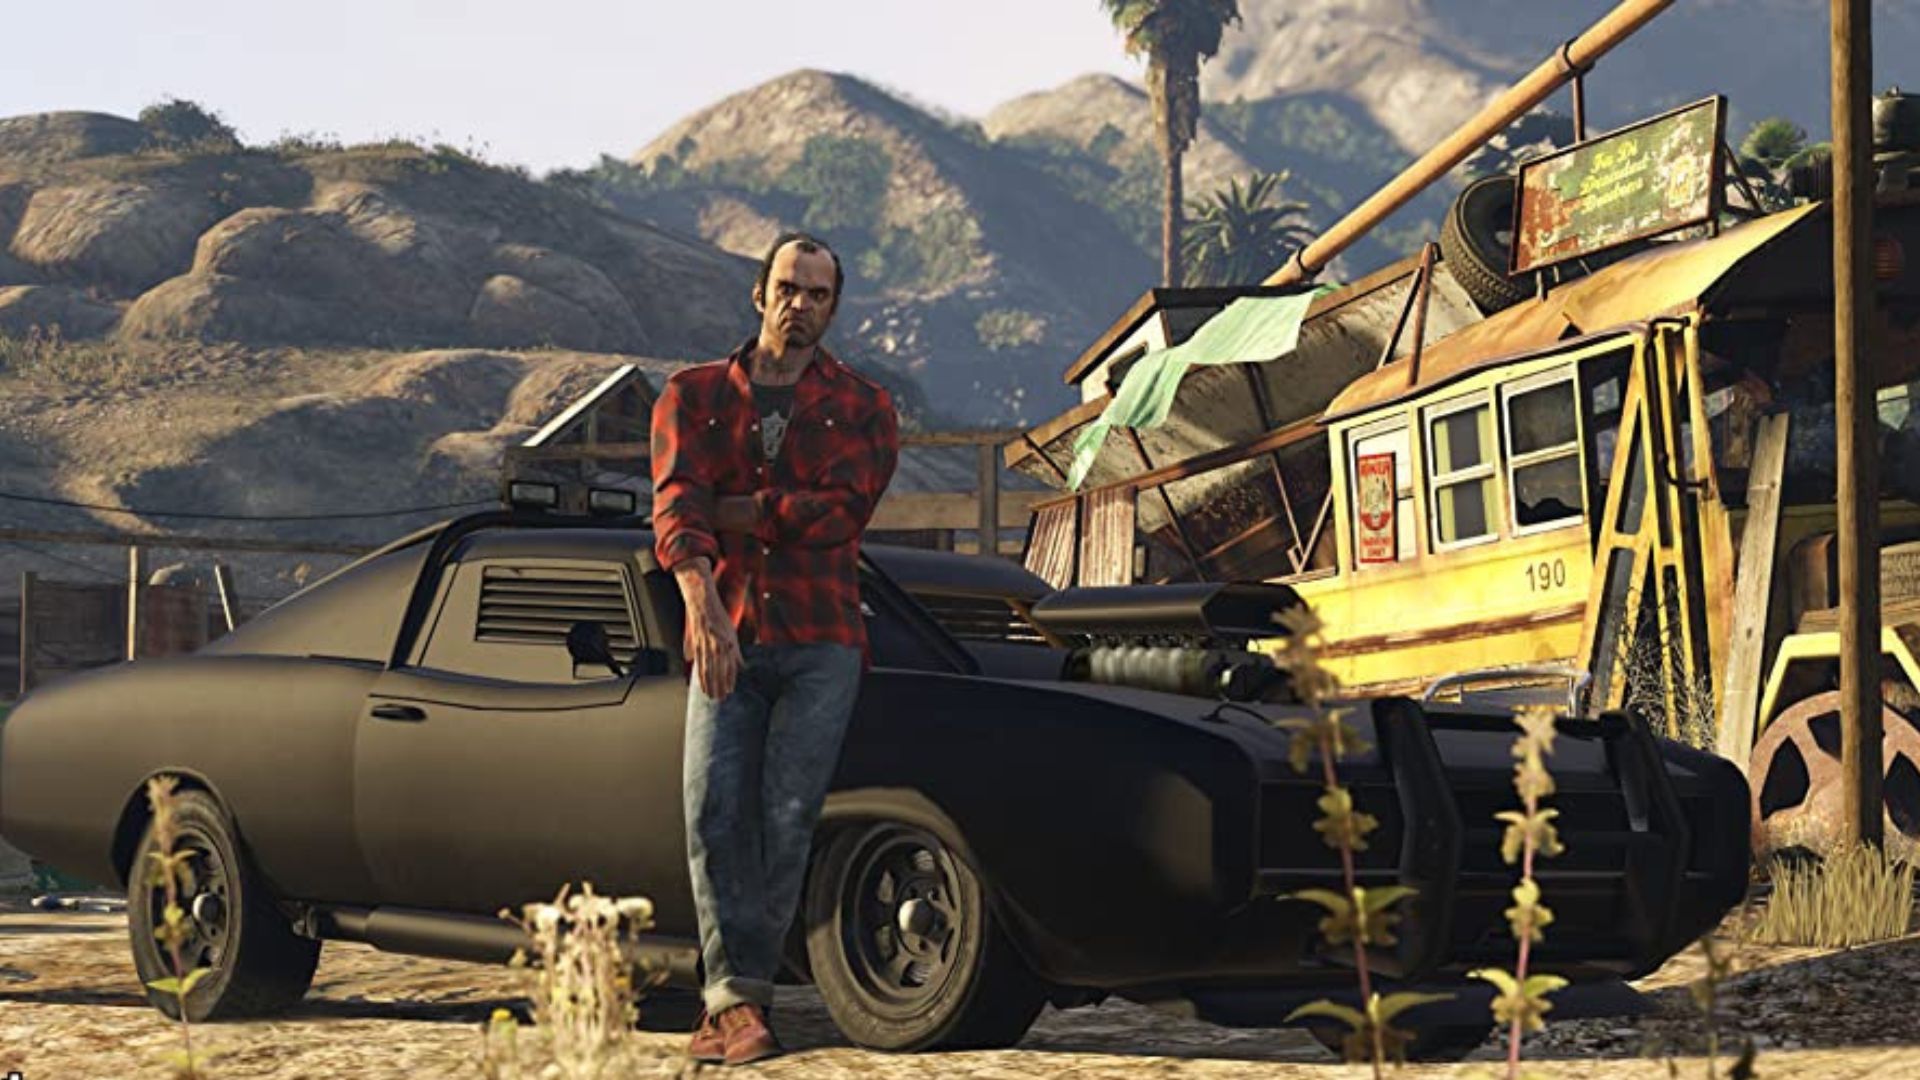 GTA 6 Might Be Released in 2024 - KeenGamer